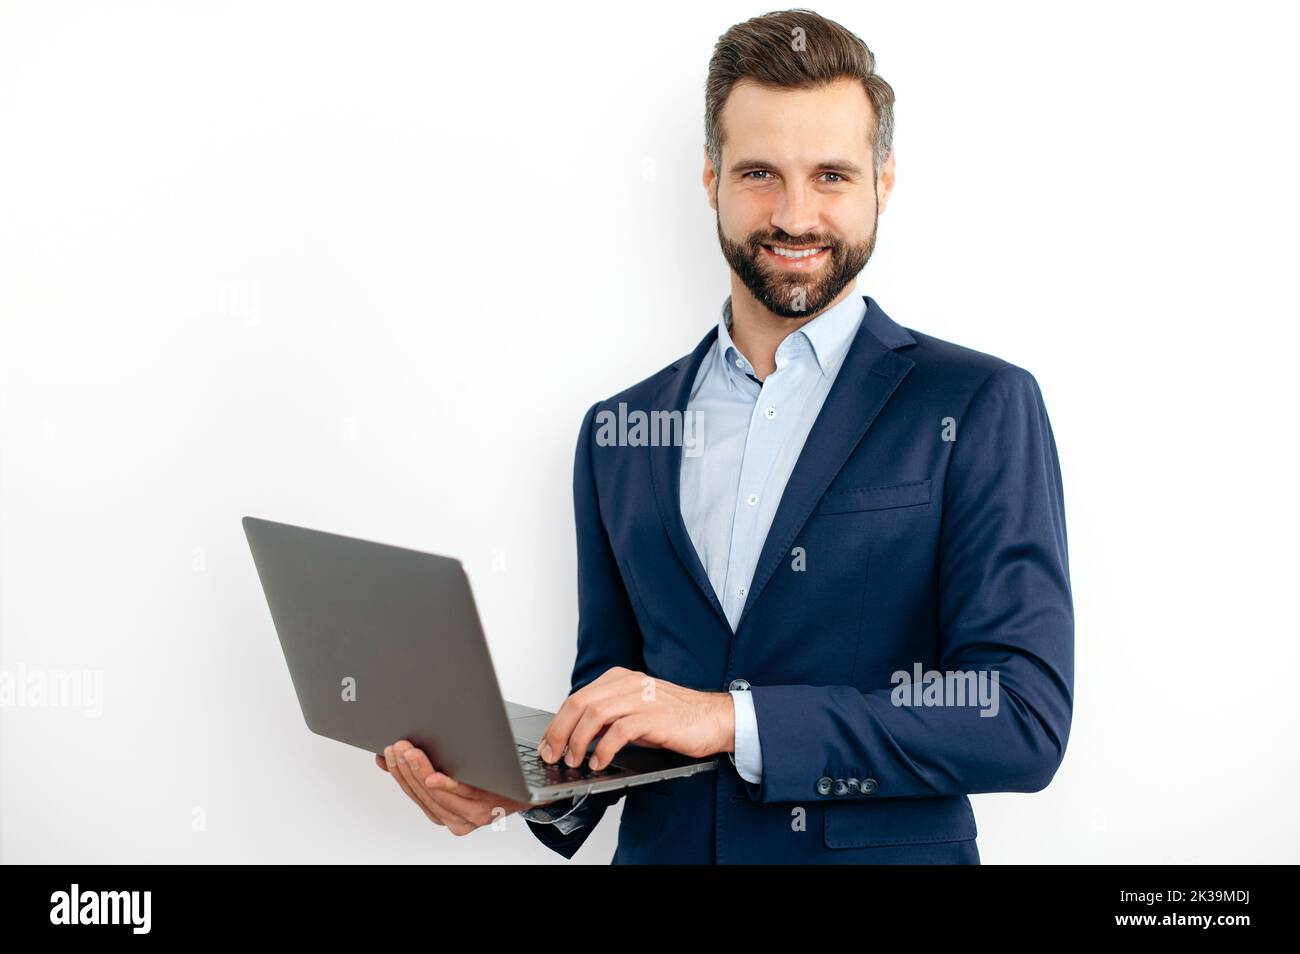 Friendly attractive caucasian bearded business man, in a suit, programmer, IT specialist, holding opening laptop in hands, standing on isolated white background, looks at camera, smiling Stock Photo